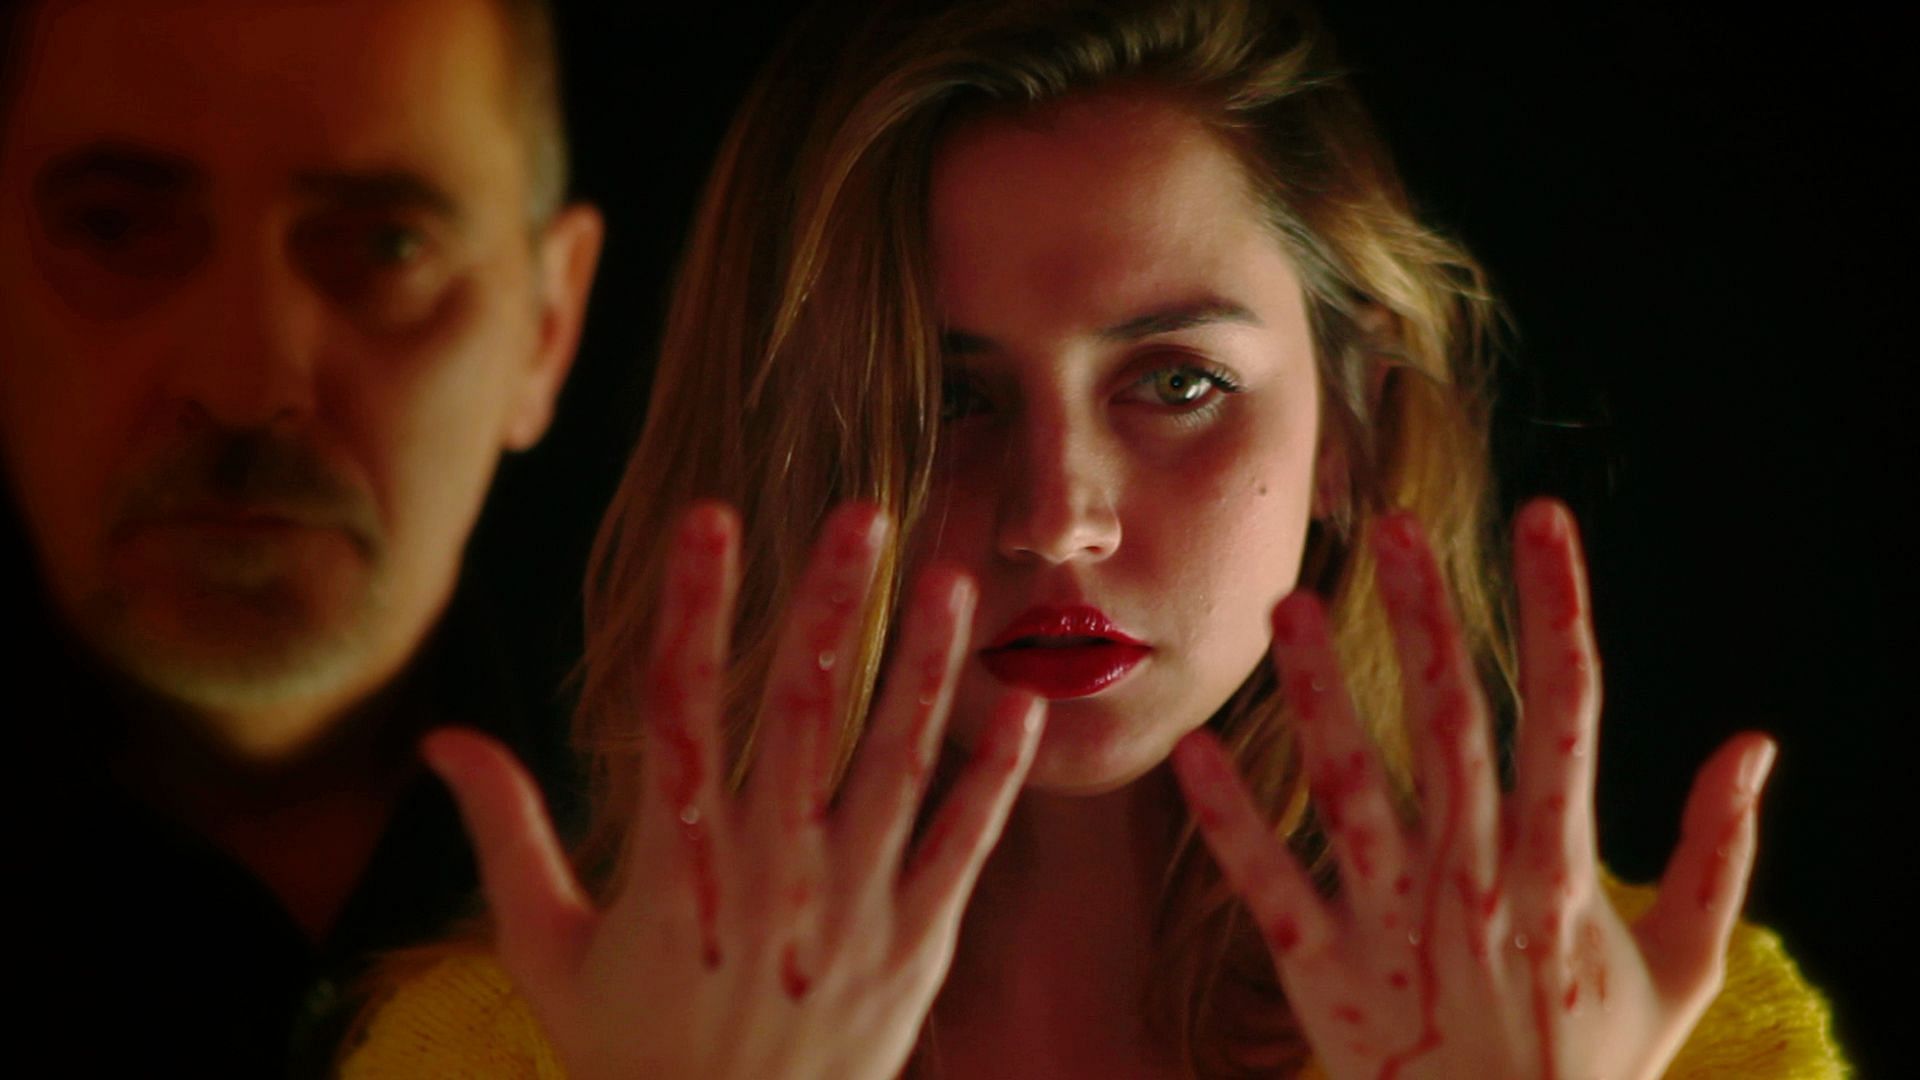 Anabel is a Spanish horror film directed by Antonio Trashorras that sees Ana De Armas play the role of Anabel. (Image via Warner Bros. Pictures)